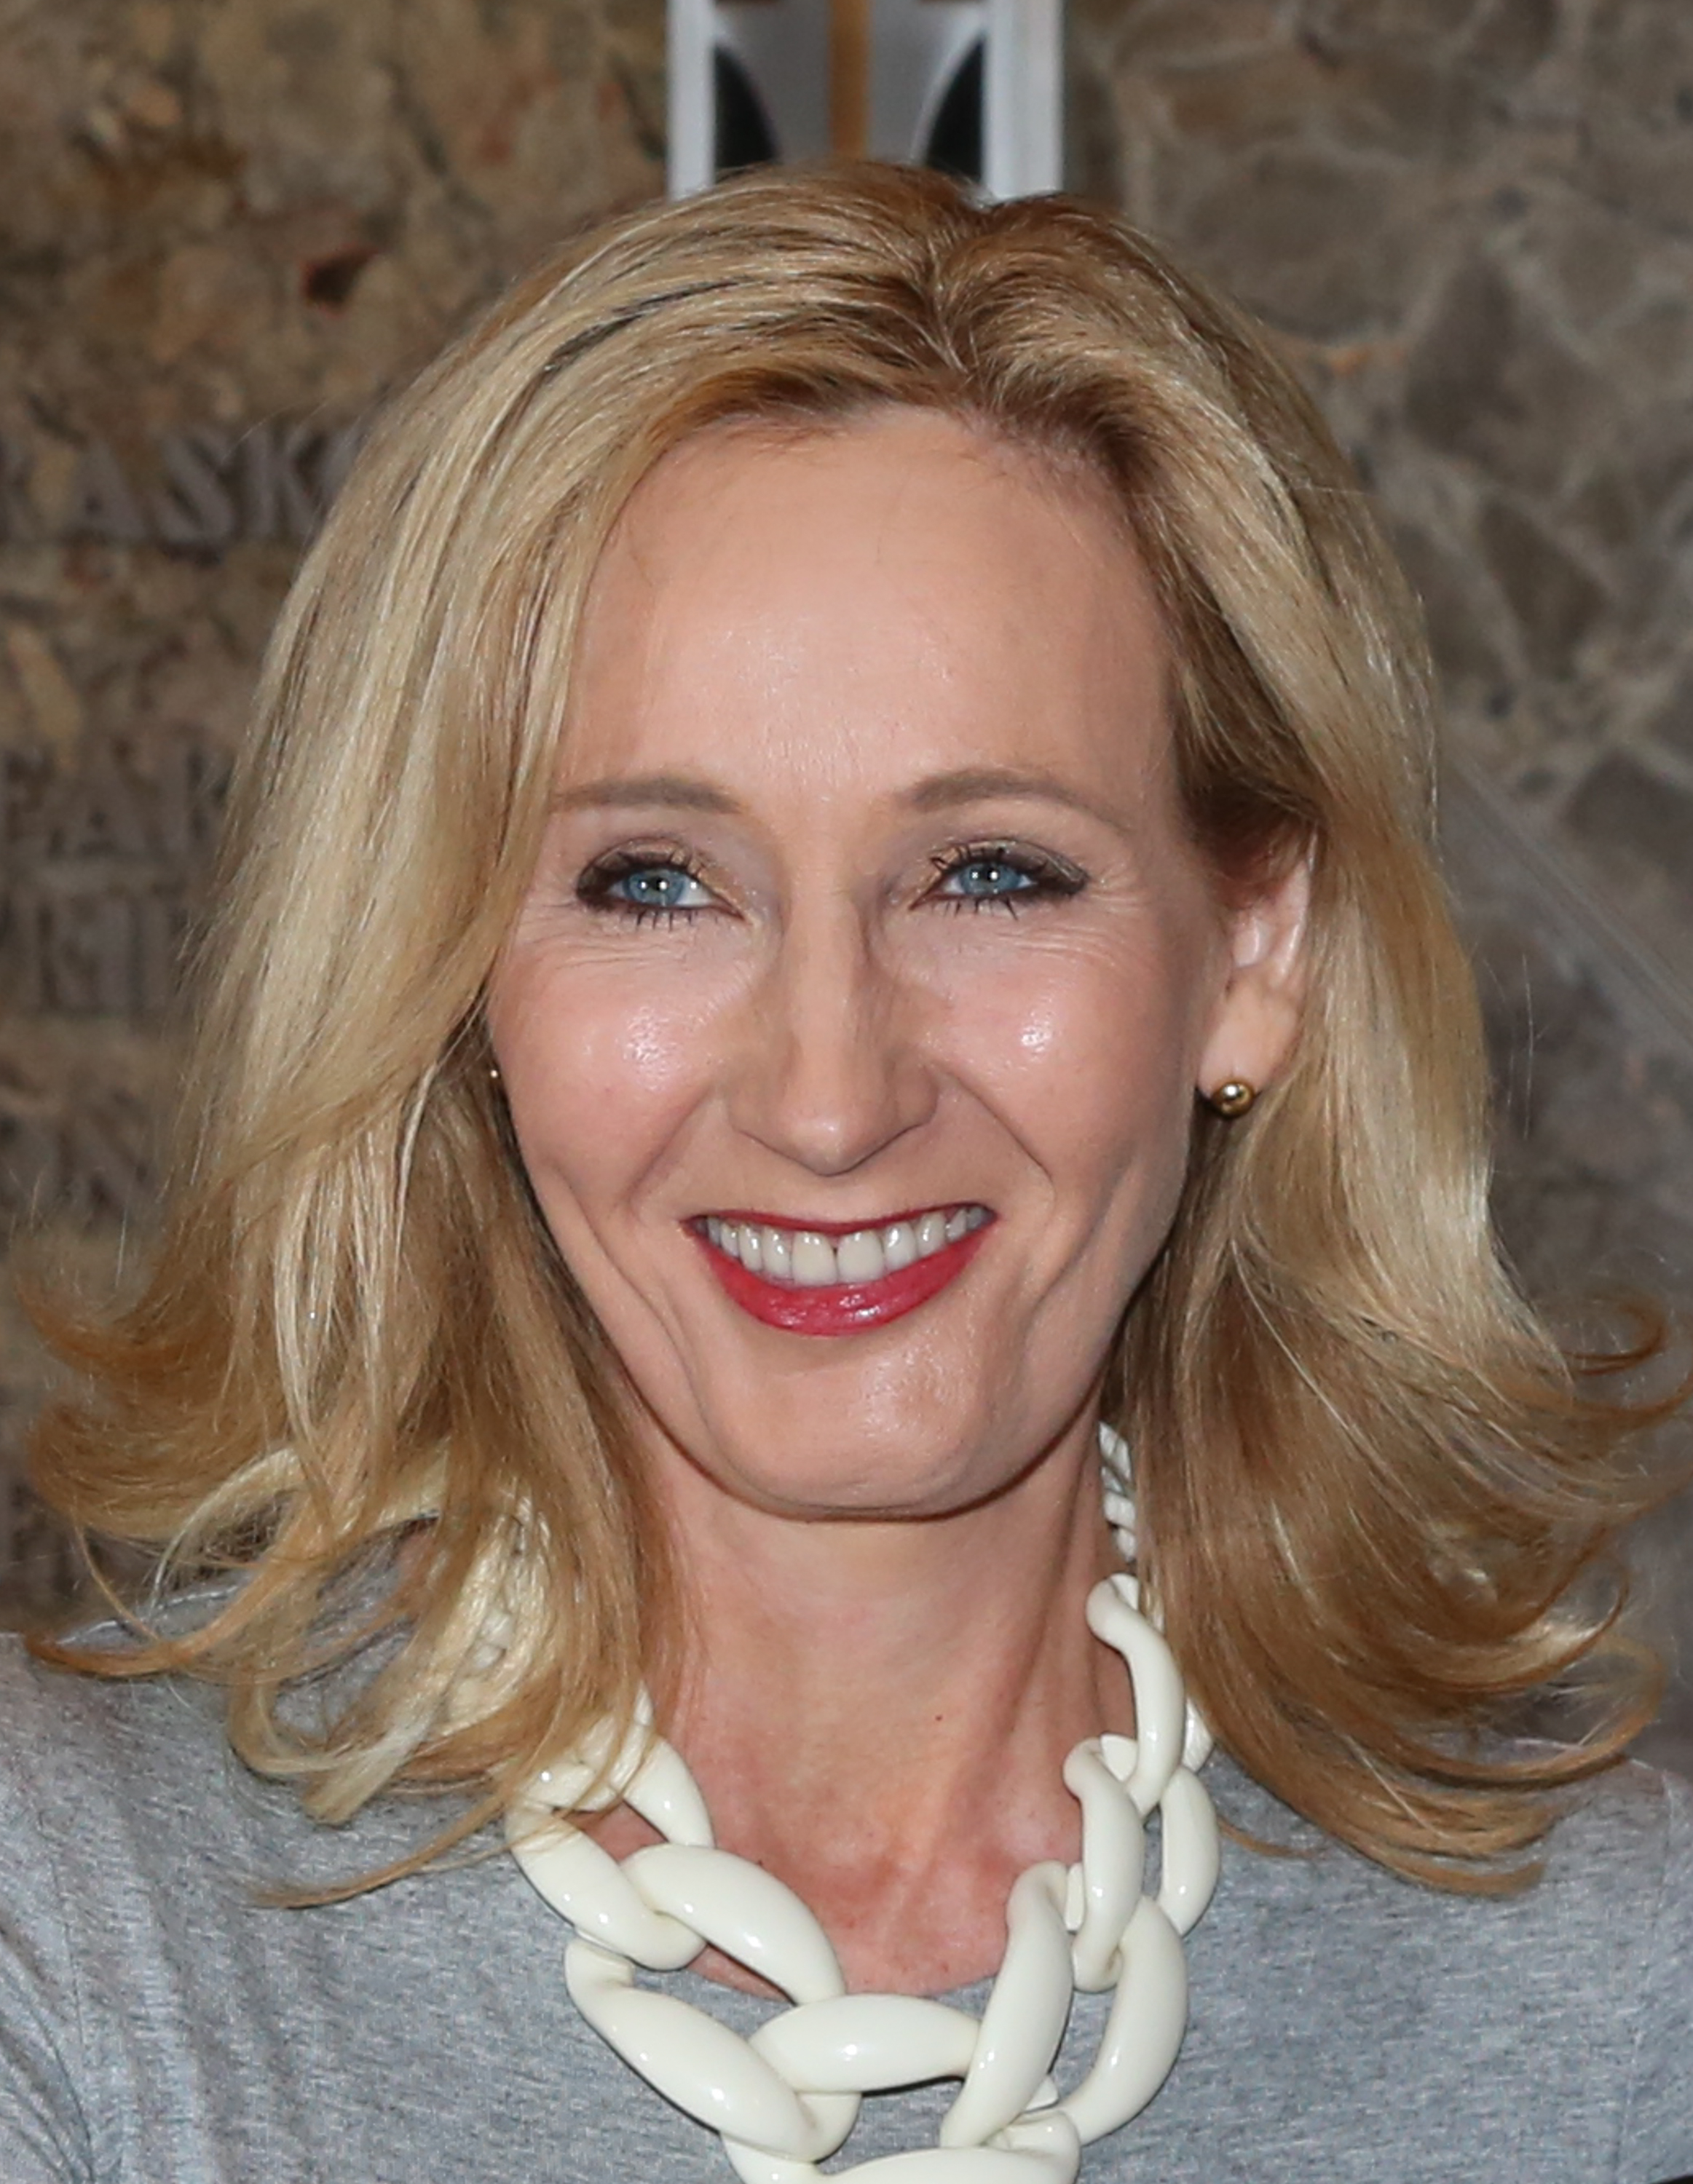 J.K. Rowling at the USA launch of her non-profit children's organization, Lumos, at The Empire State Building in New York City on April 9, 2015. (Nomi Ellenson—FilmMagic/Getty Images)